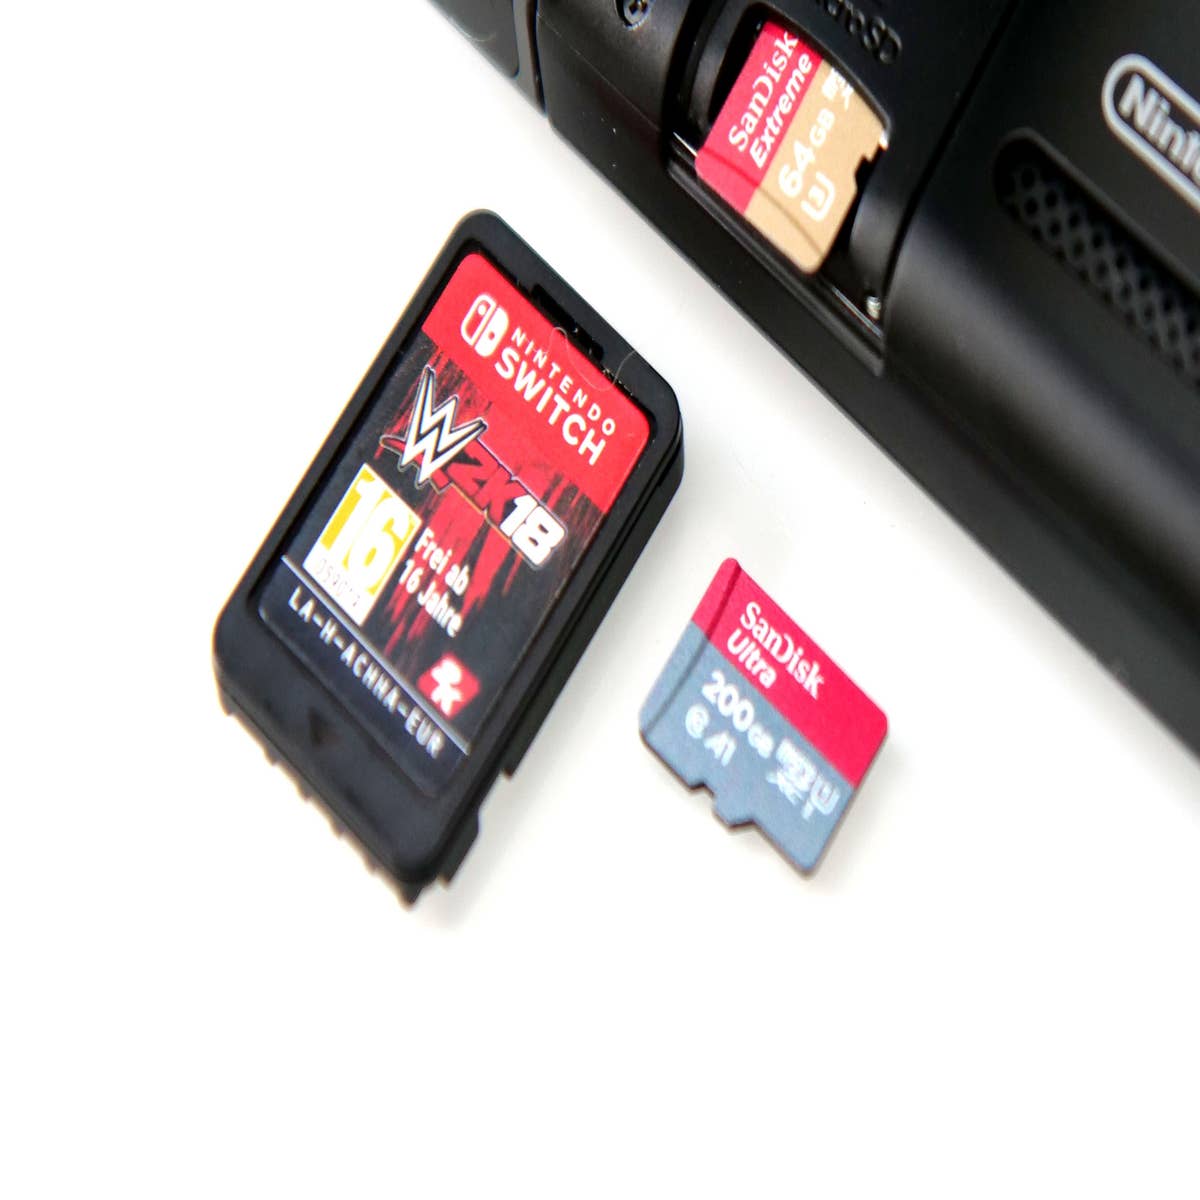 SUPPORT SD CARD (SD Socket to Mini)